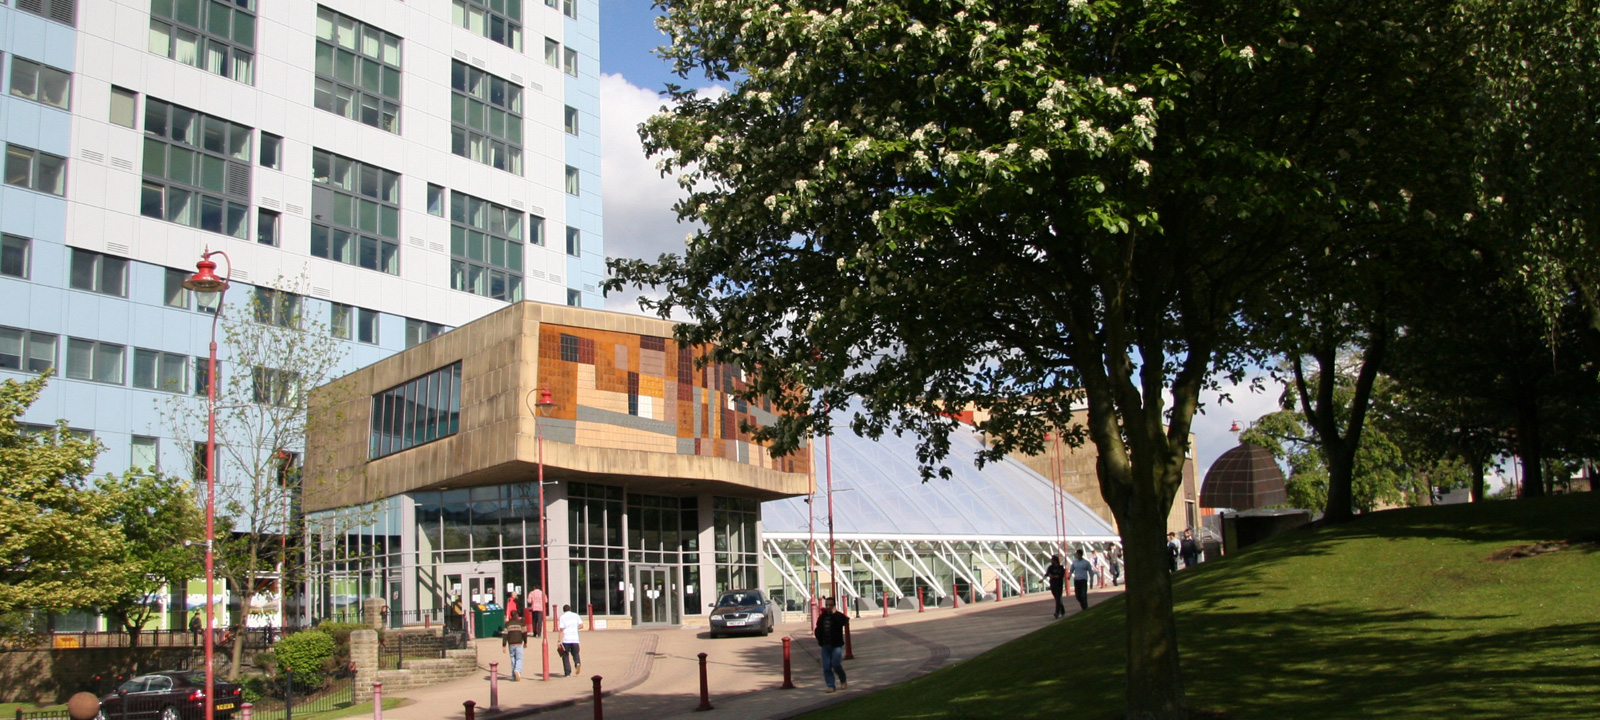 Exterior of the Richmond building on the University of Bradford Campus